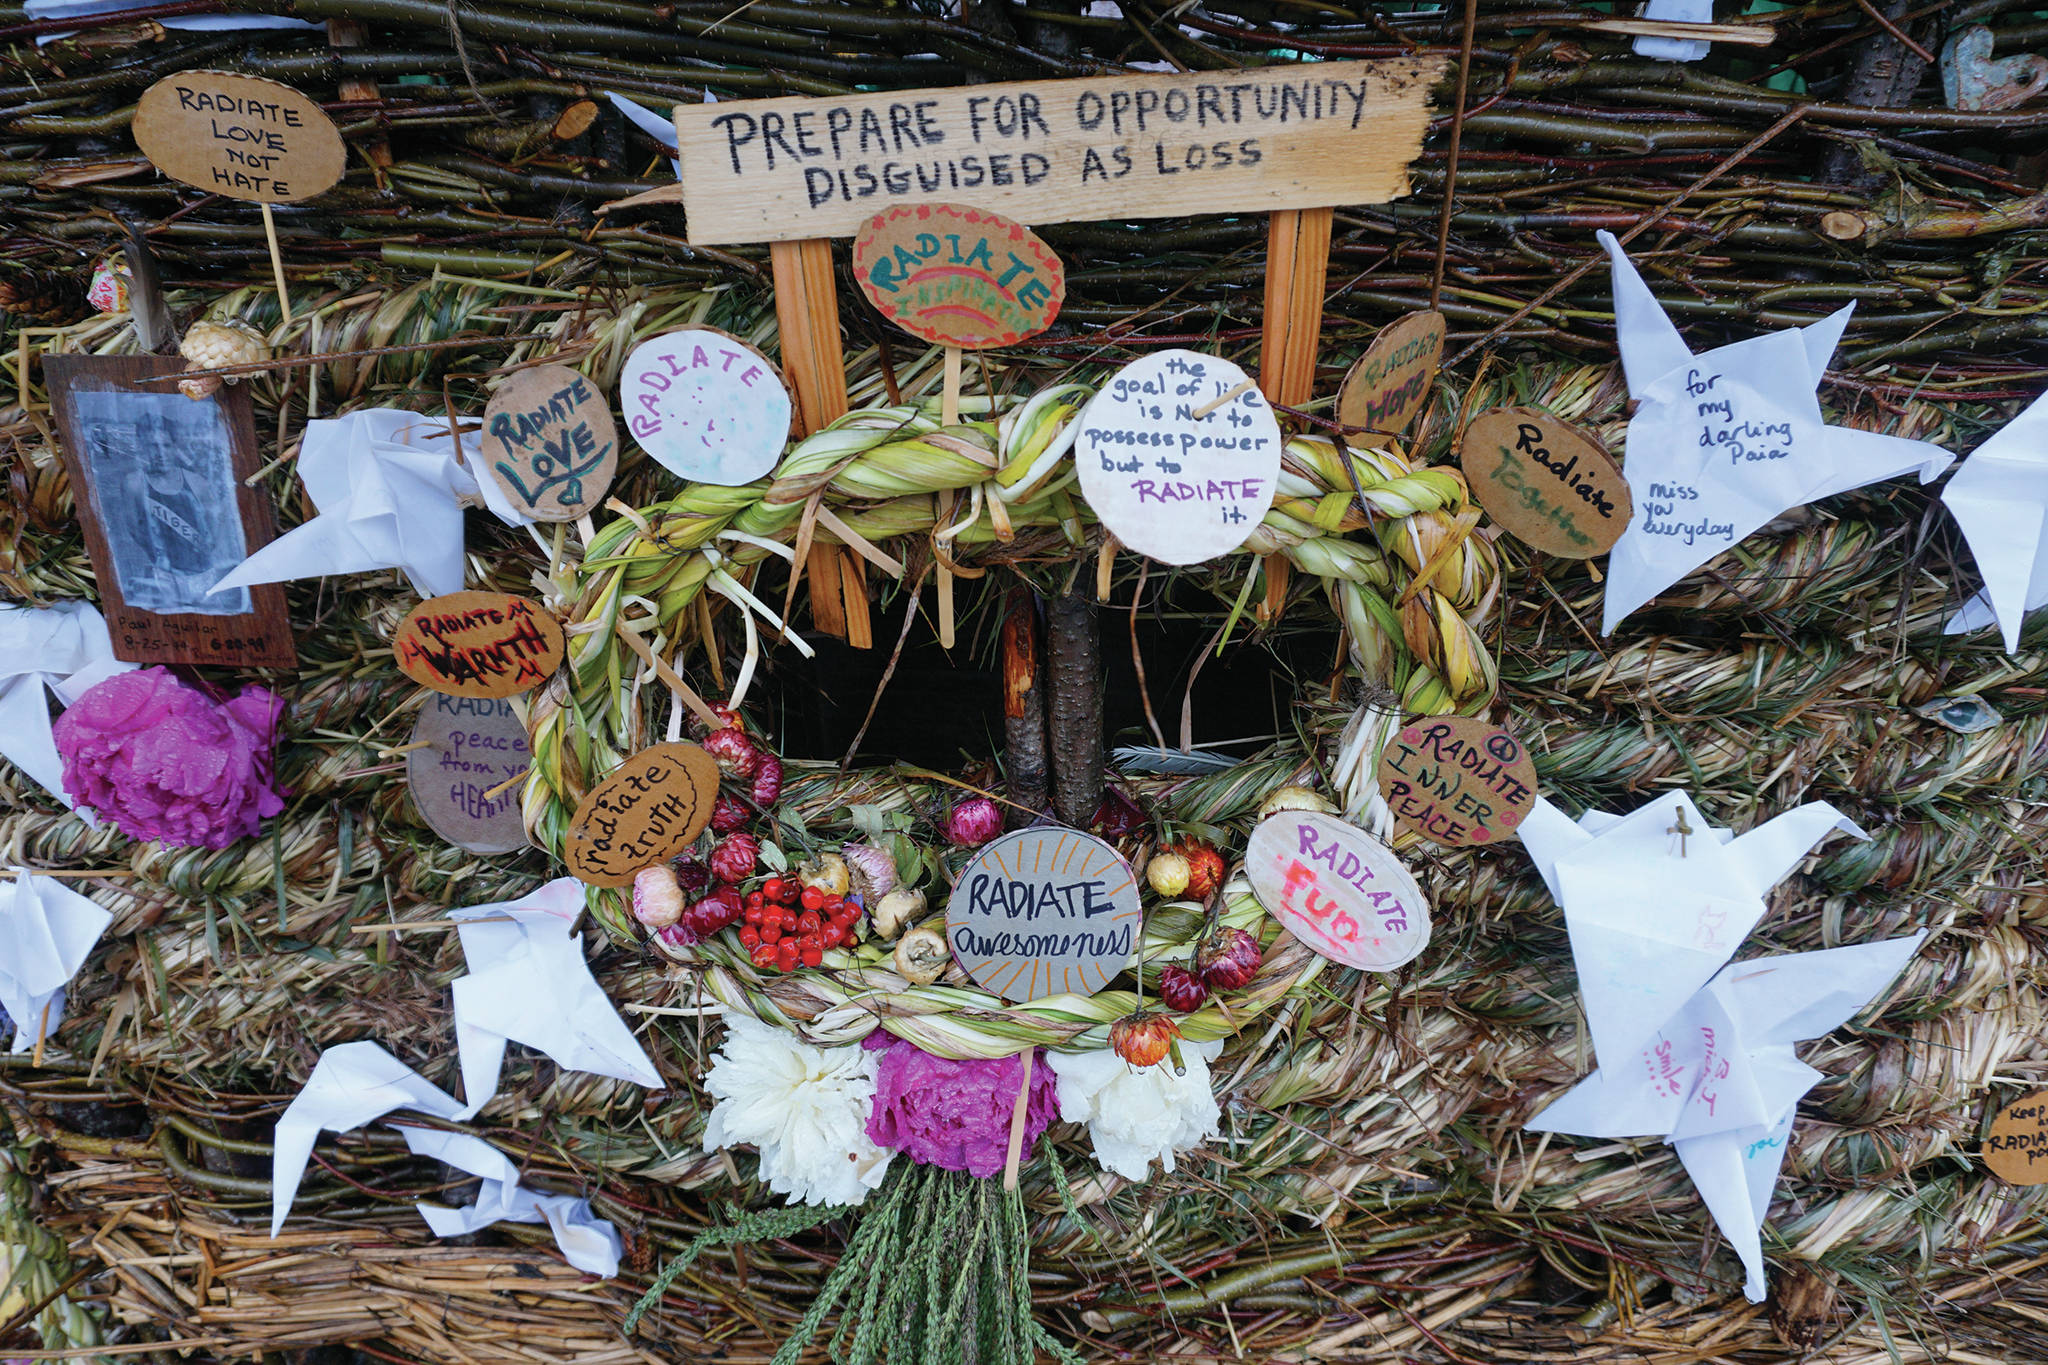 Some of the messages on “Radiate,” the 16th annual Burning Basket. The basket was burned on Sunday night, Sept. 15, 2019, at Mariner Park on the Homer Spit in Homer, Alaska. (Photo by Michael Armstrong/Homer News)